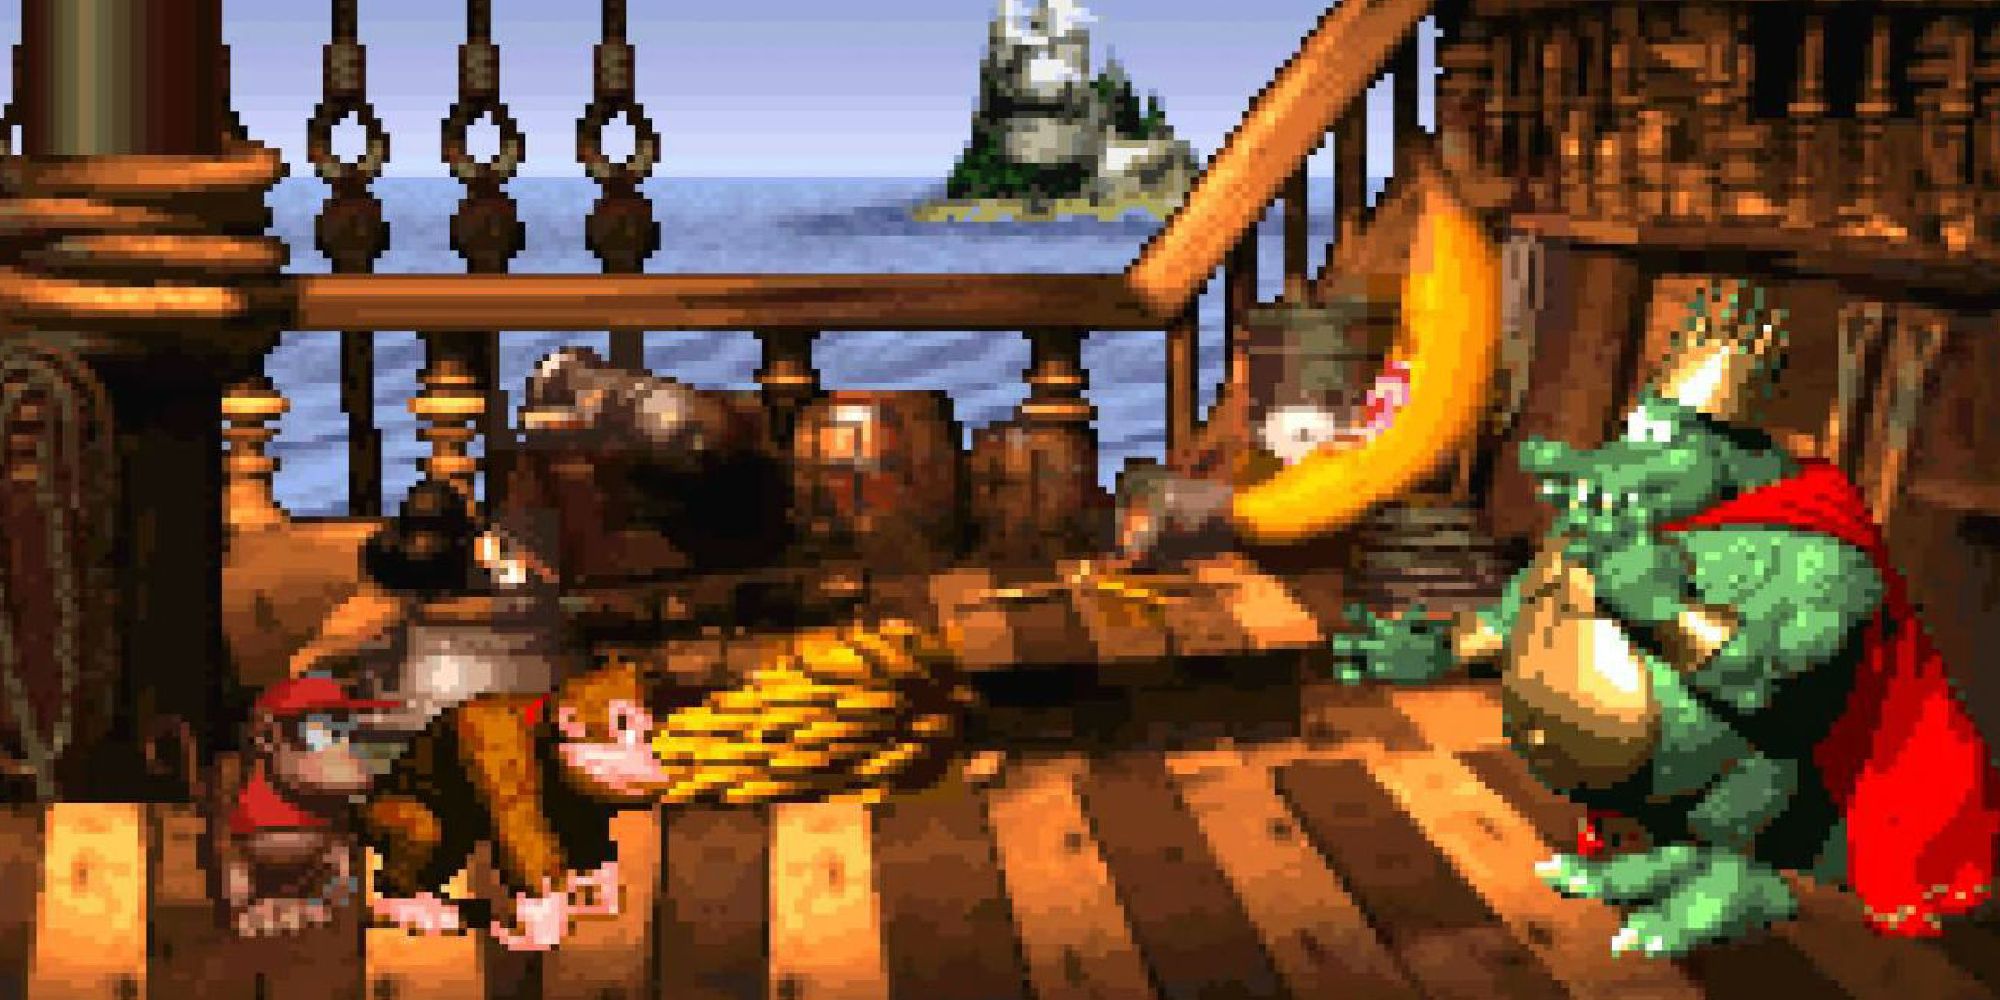 Donkey Kong and Diddy Kong battling King K. Rool on a pirate ship in Donkey Kong Country